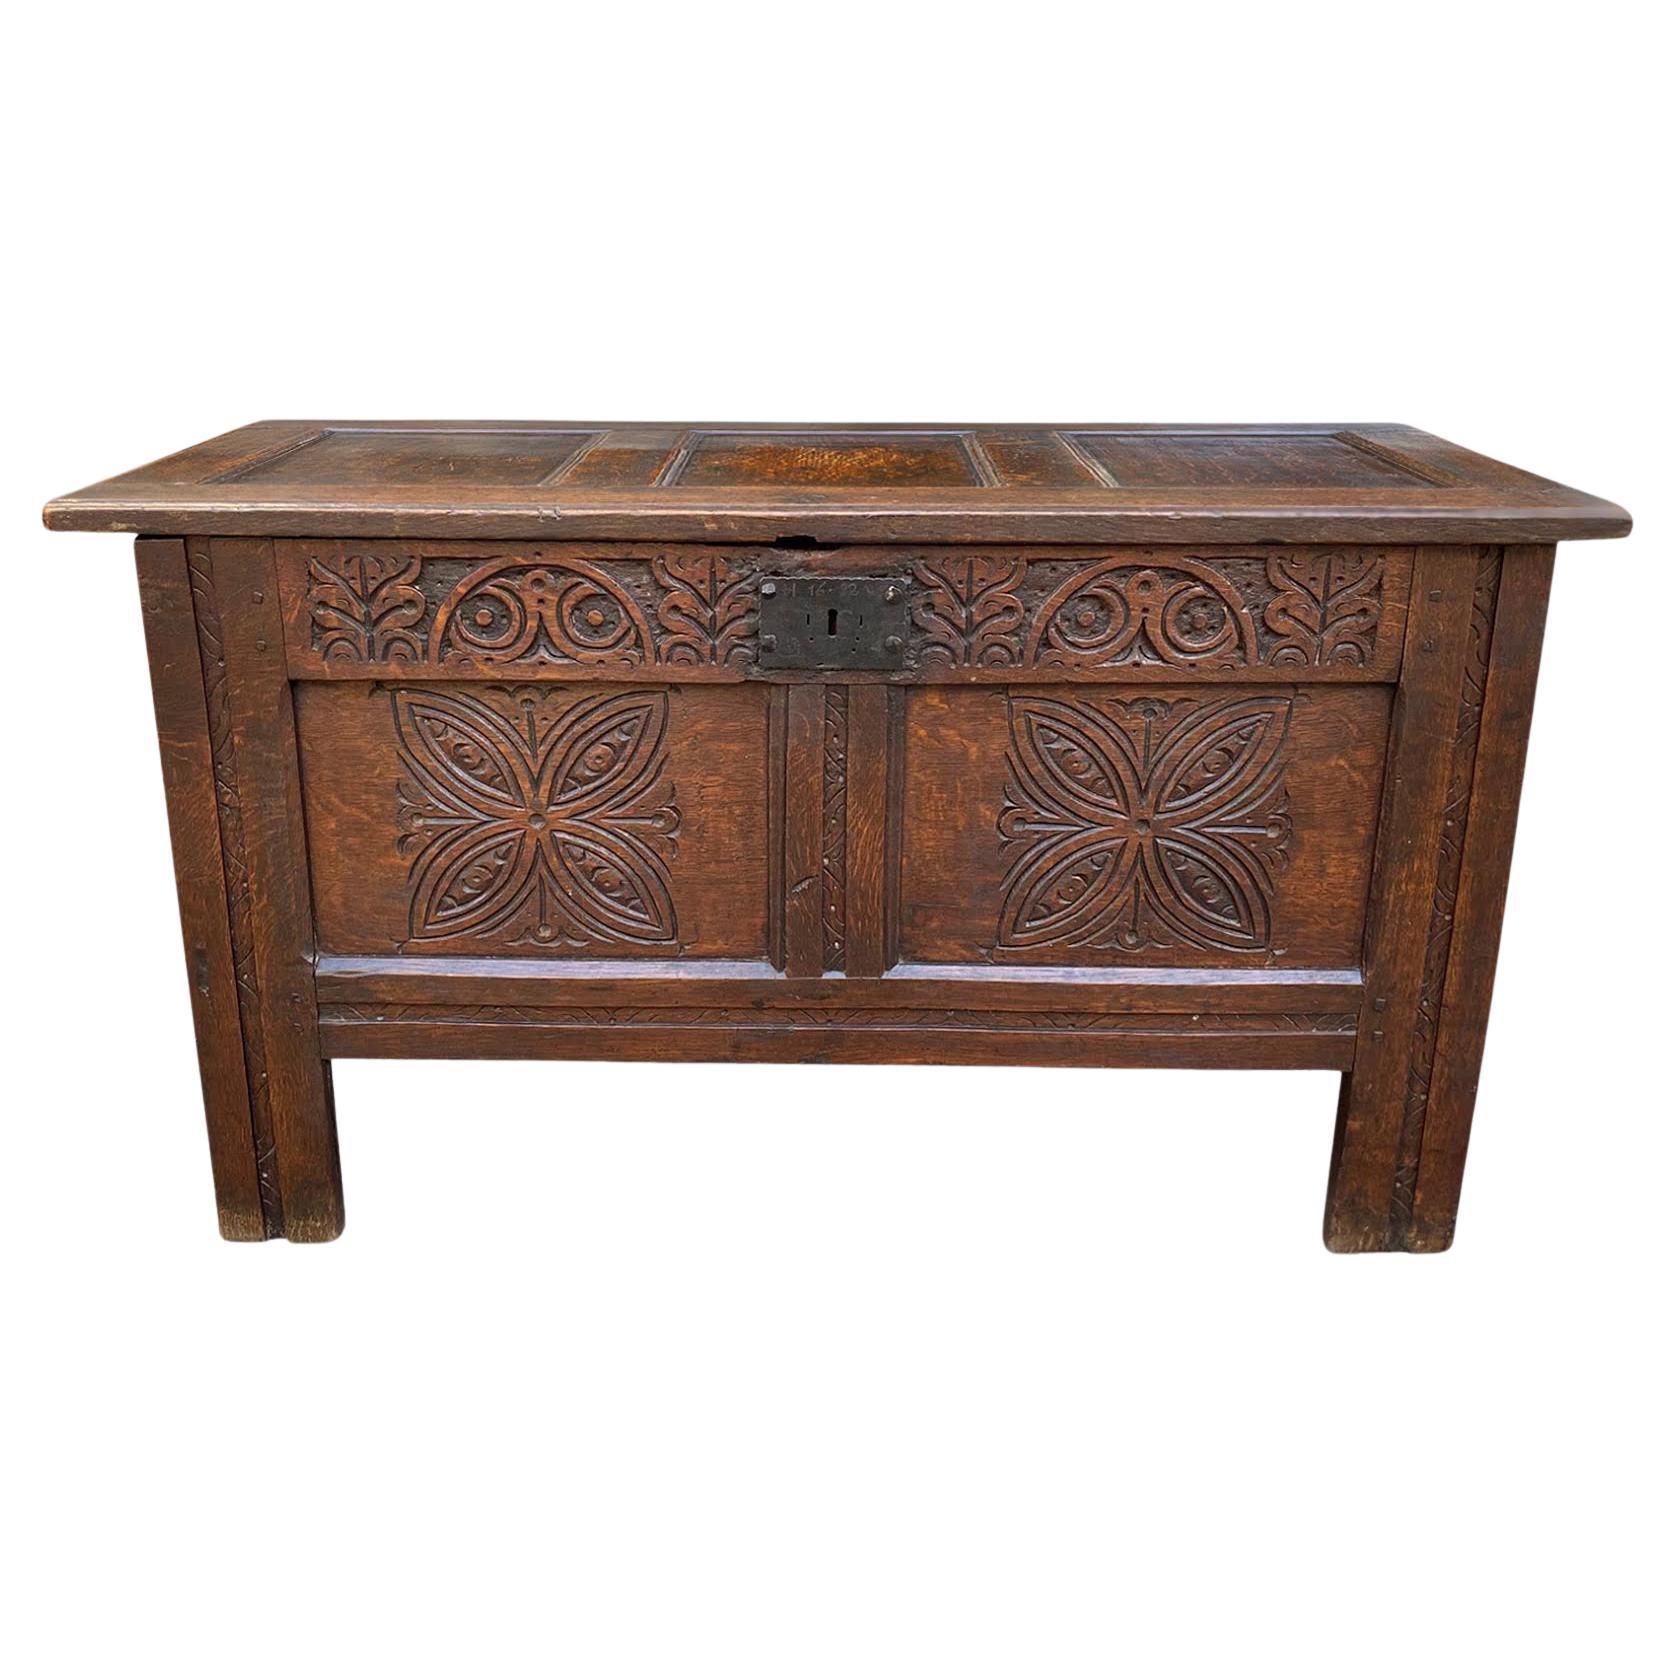 18th Century Small Carved Oak Panelled Coffer Chest